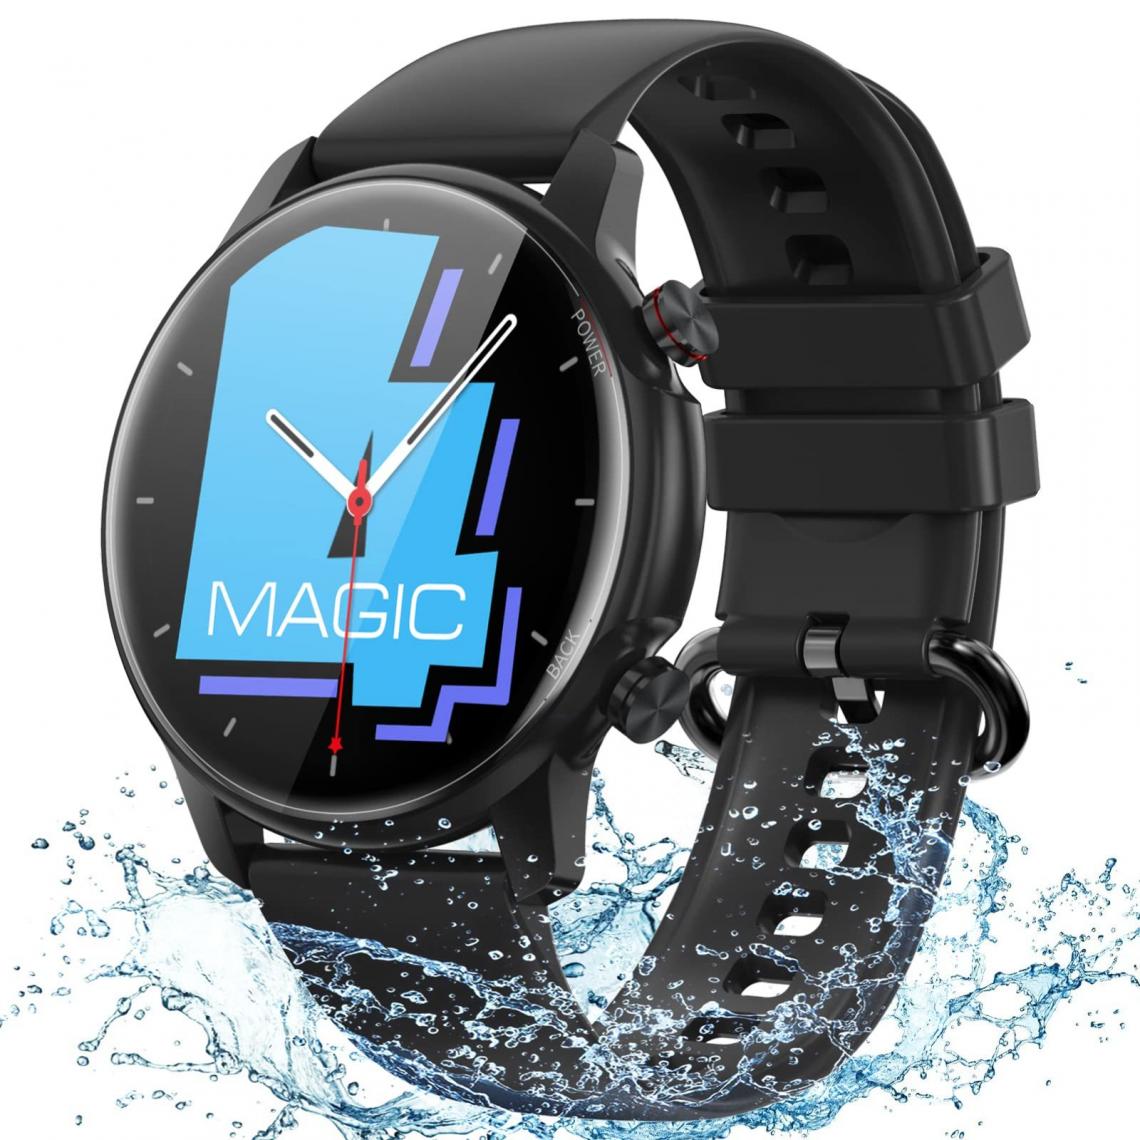 Chronotech Montres - Chronus Magic 4 Smartwatch Demen, 1.32 inch Full Touchscreen Fitness Watch Waterproof 5ATM Wristwatch, Fitness Tracker with Blood Pressure Measurement Heart Rate Monitor Pedometer Smart Watch For Android iOS(black) - Montre connectée